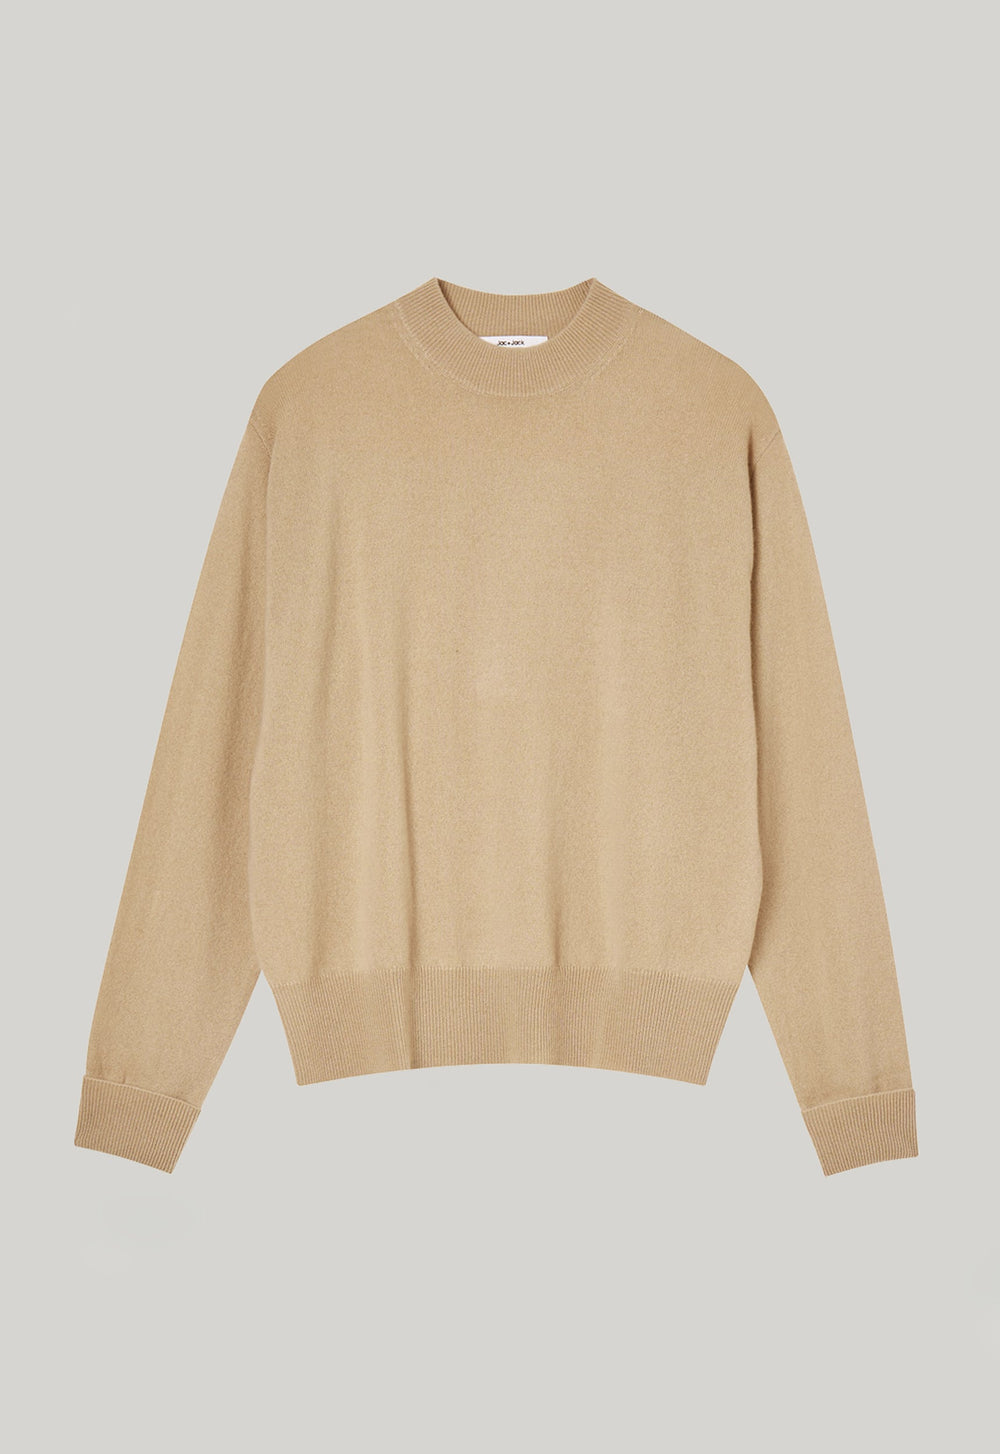 Jac+Jack RYDER CASHMERE SWEATER in Canas